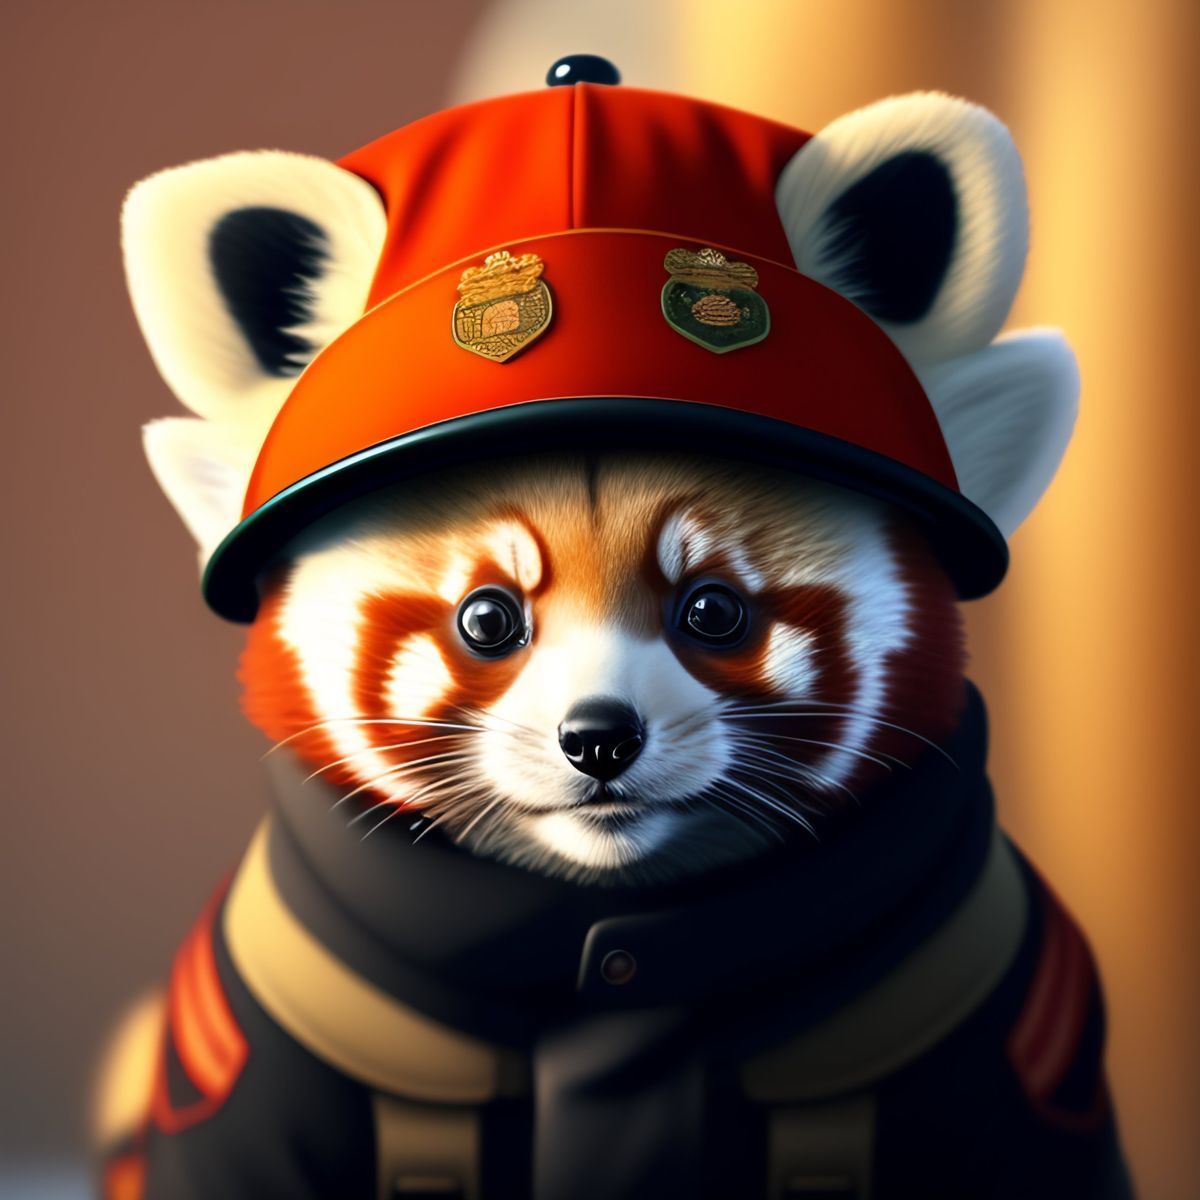 The Hilarious Adventures of Rufus, the Red Panda